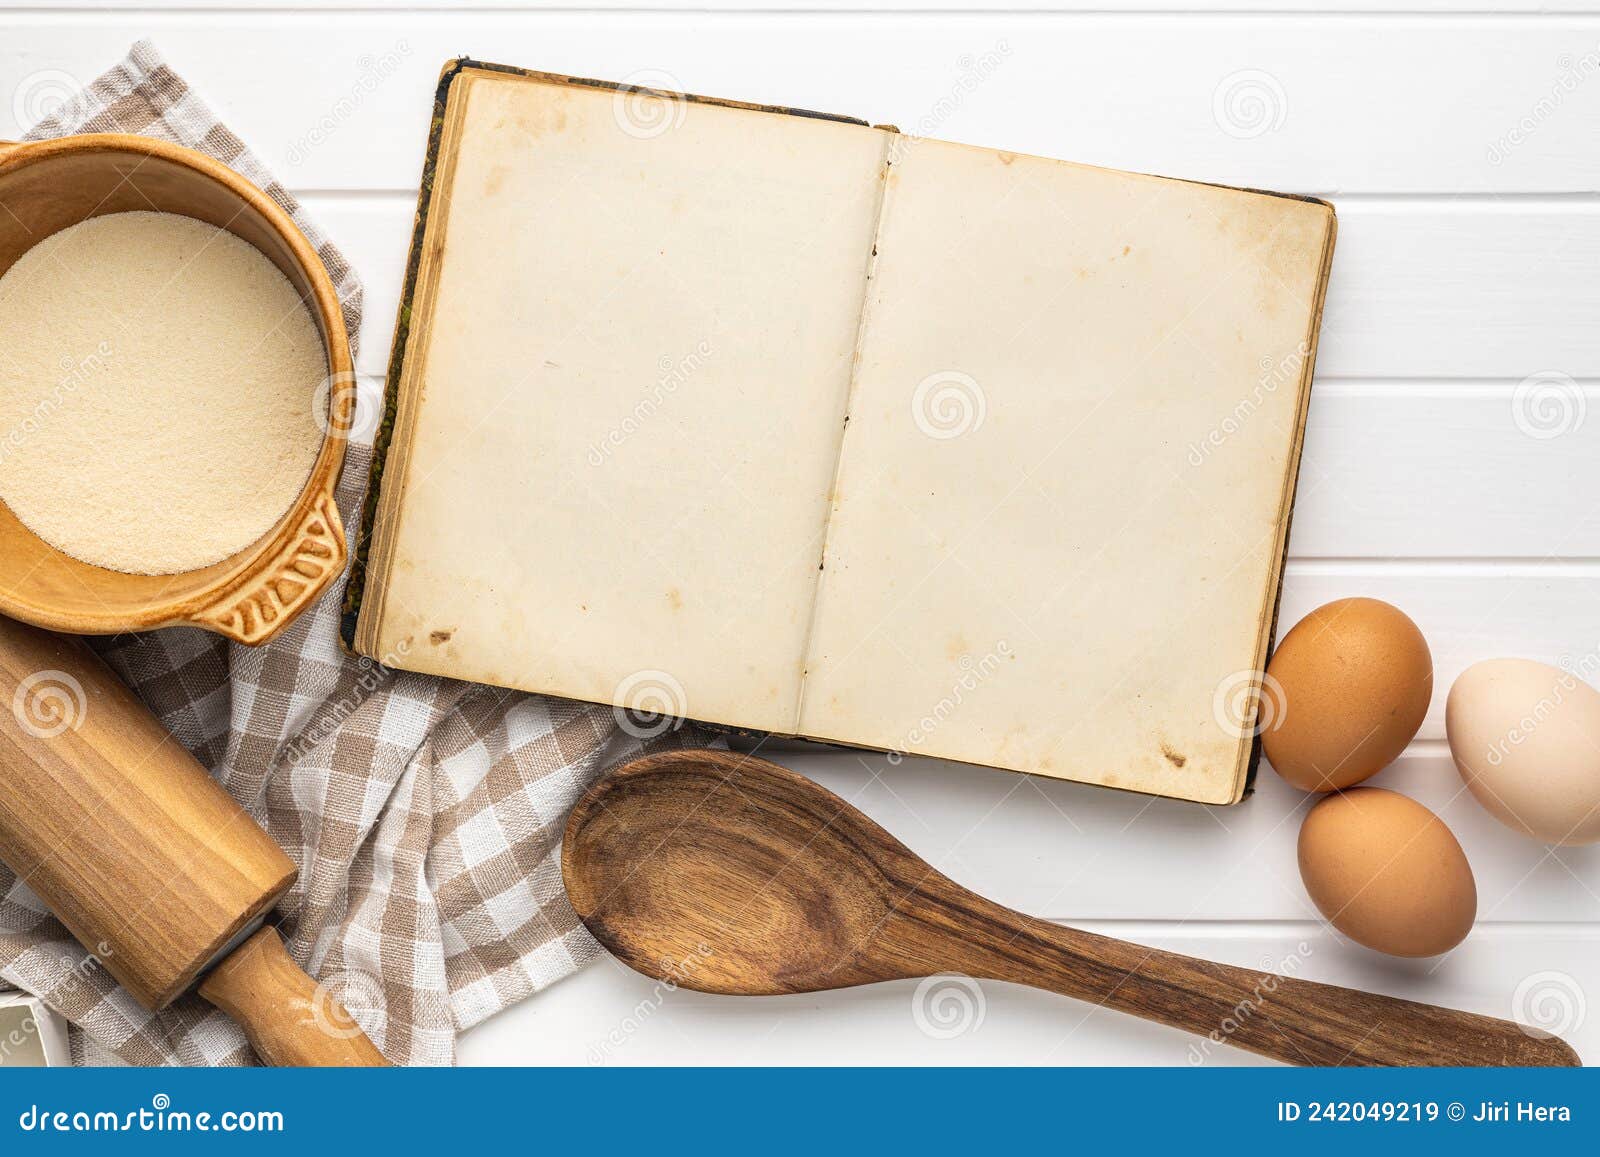 https://thumbs.dreamstime.com/z/open-blank-cookbook-antique-recipe-book-white-table-open-blank-cookbook-antique-recipe-book-white-table-top-view-242049219.jpg